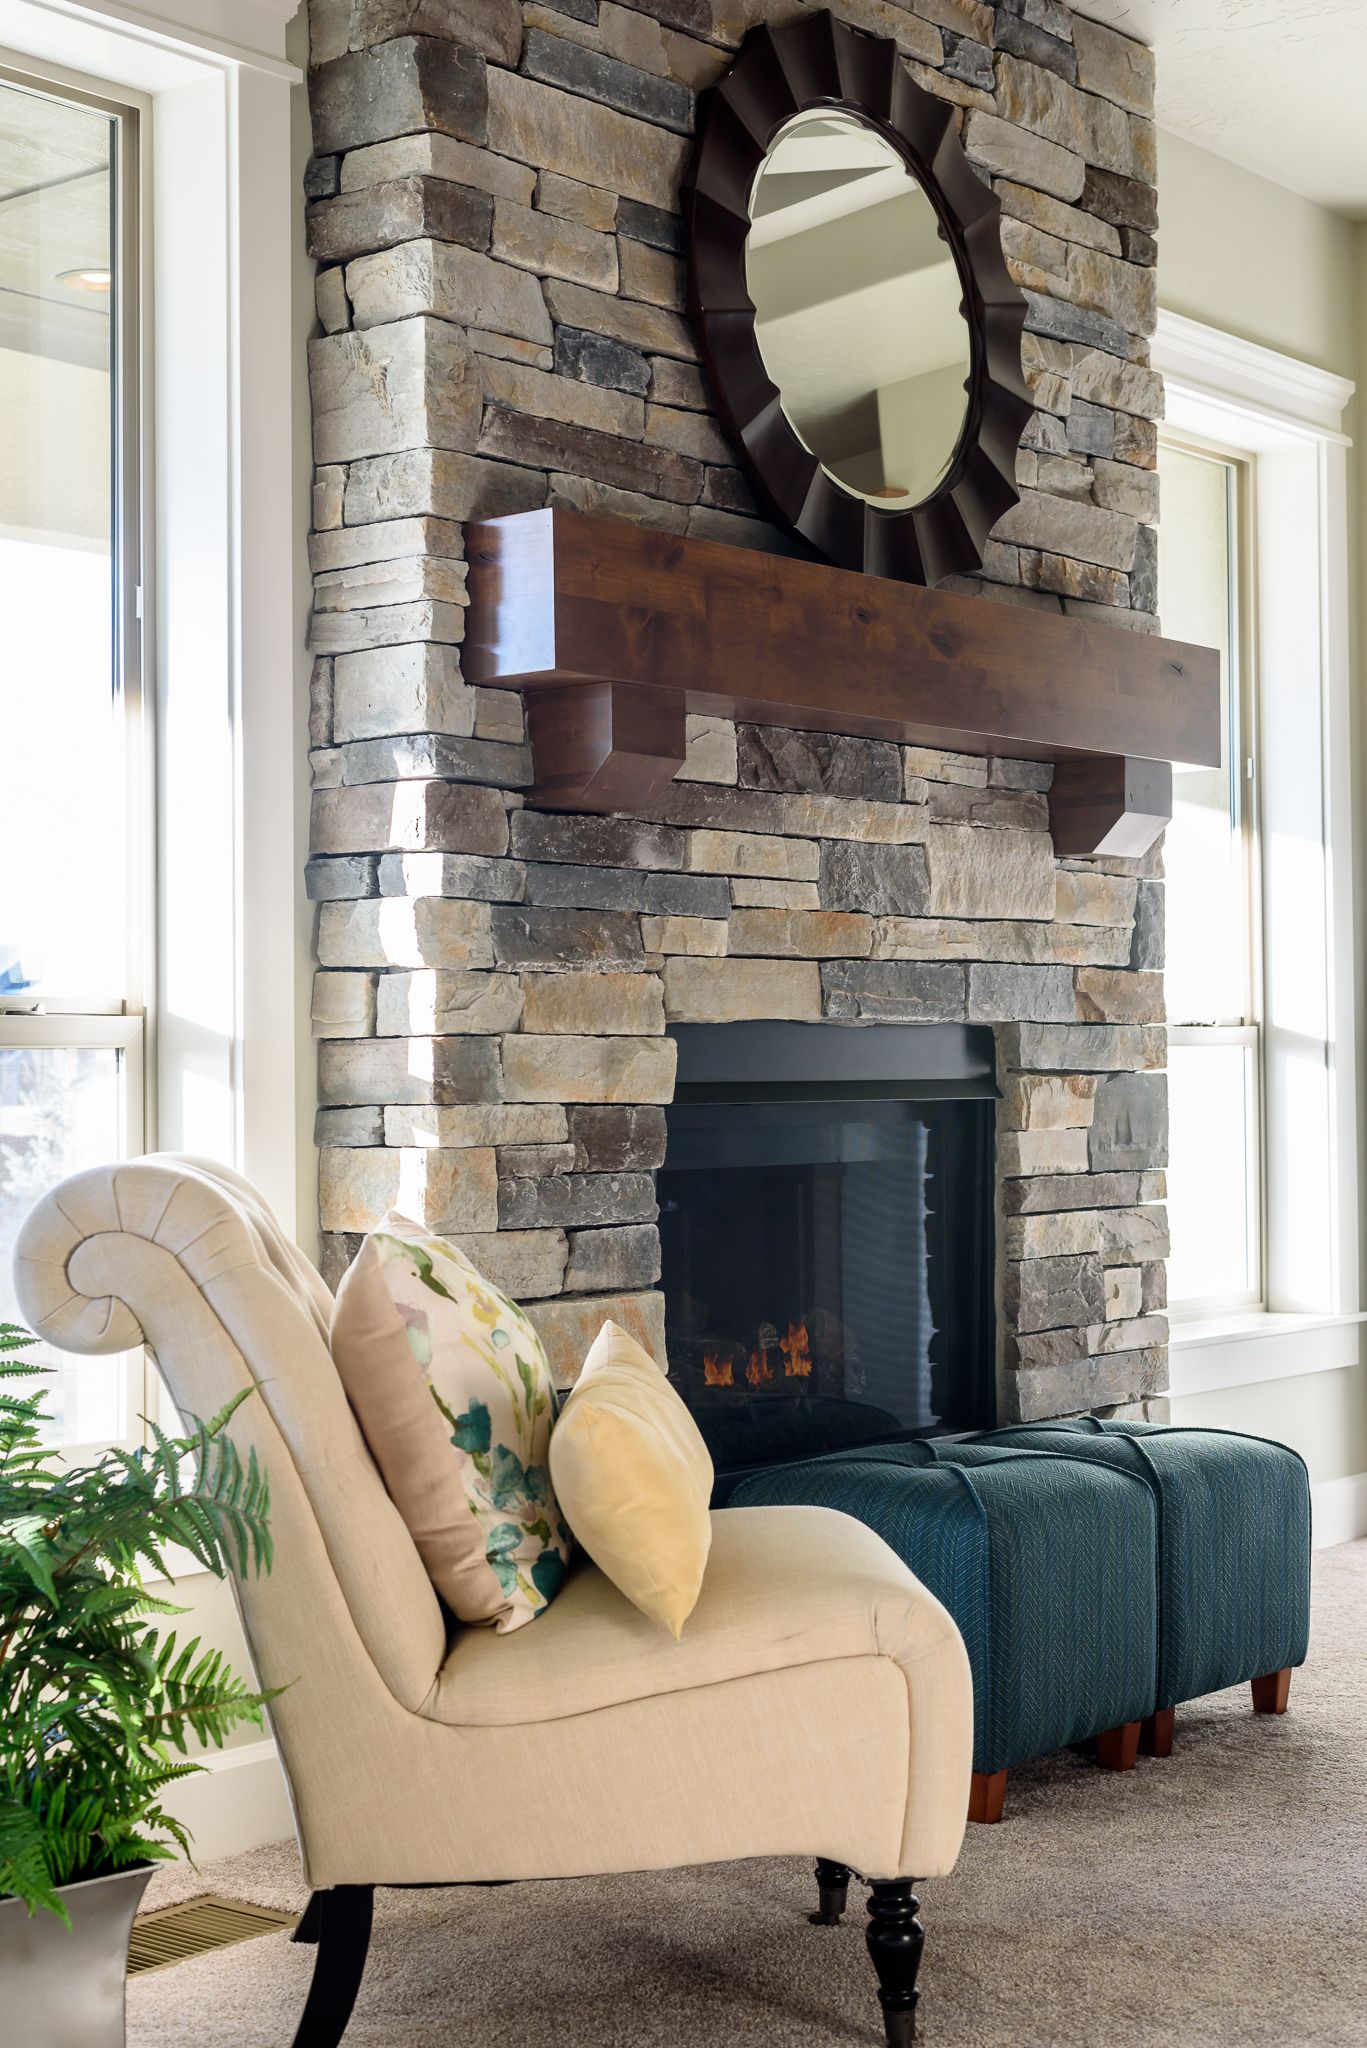 Stone On Fireplace Awesome Echo Ridge Country Ledgestone On This Floor to Ceiling Stone